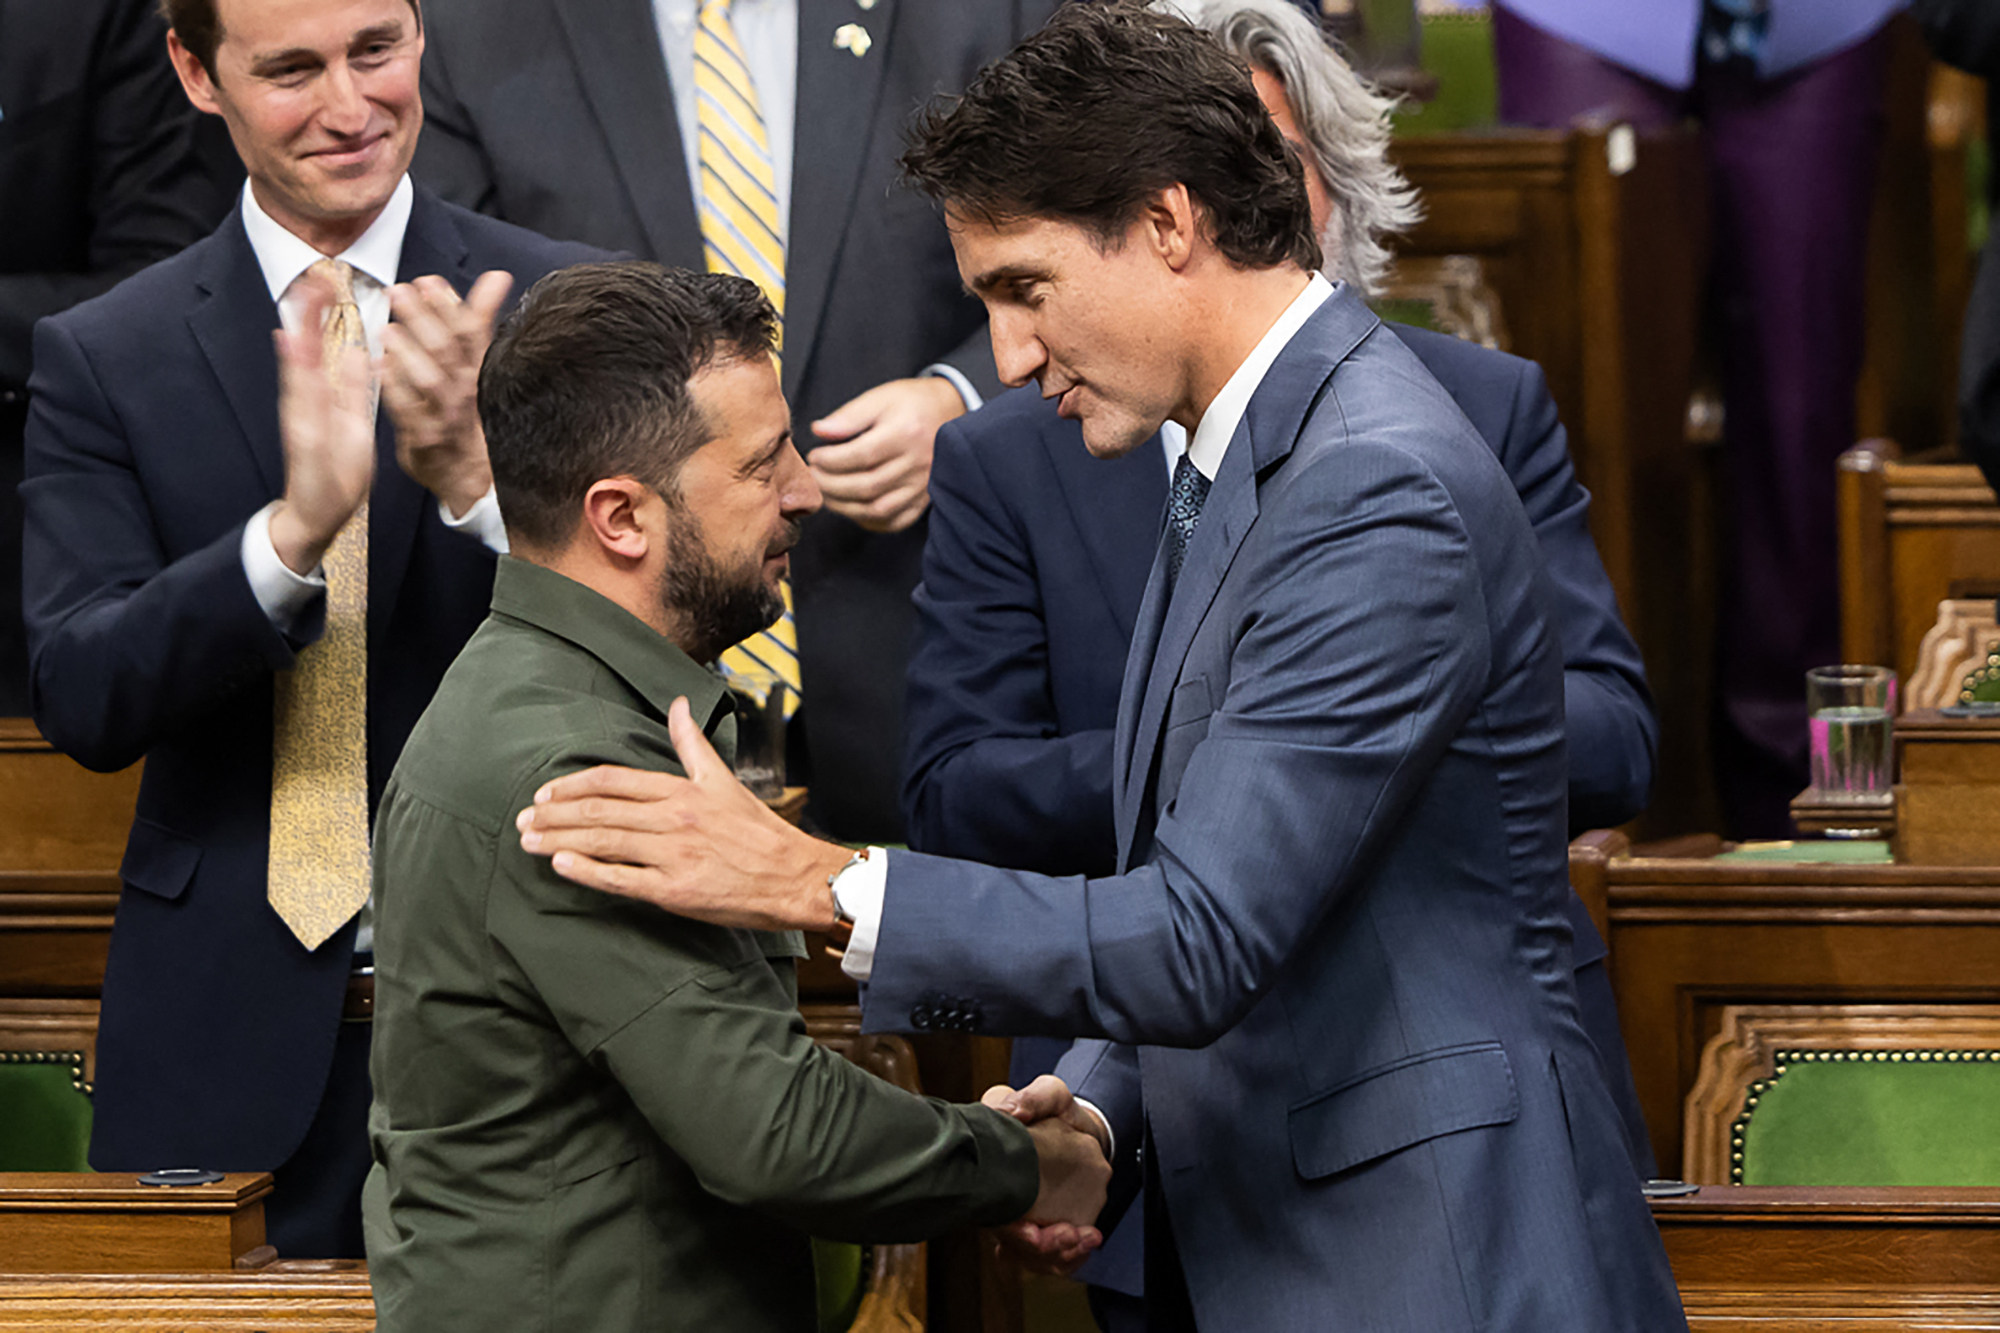 Ukraine’s President Volodymyr Zelensky (left) is greeted by Canada’s Prime Minister Justin Trudeau at the House of Commons in Ottawa on September 22. Photo: Ukrainian Presidential Press Service  via AFP